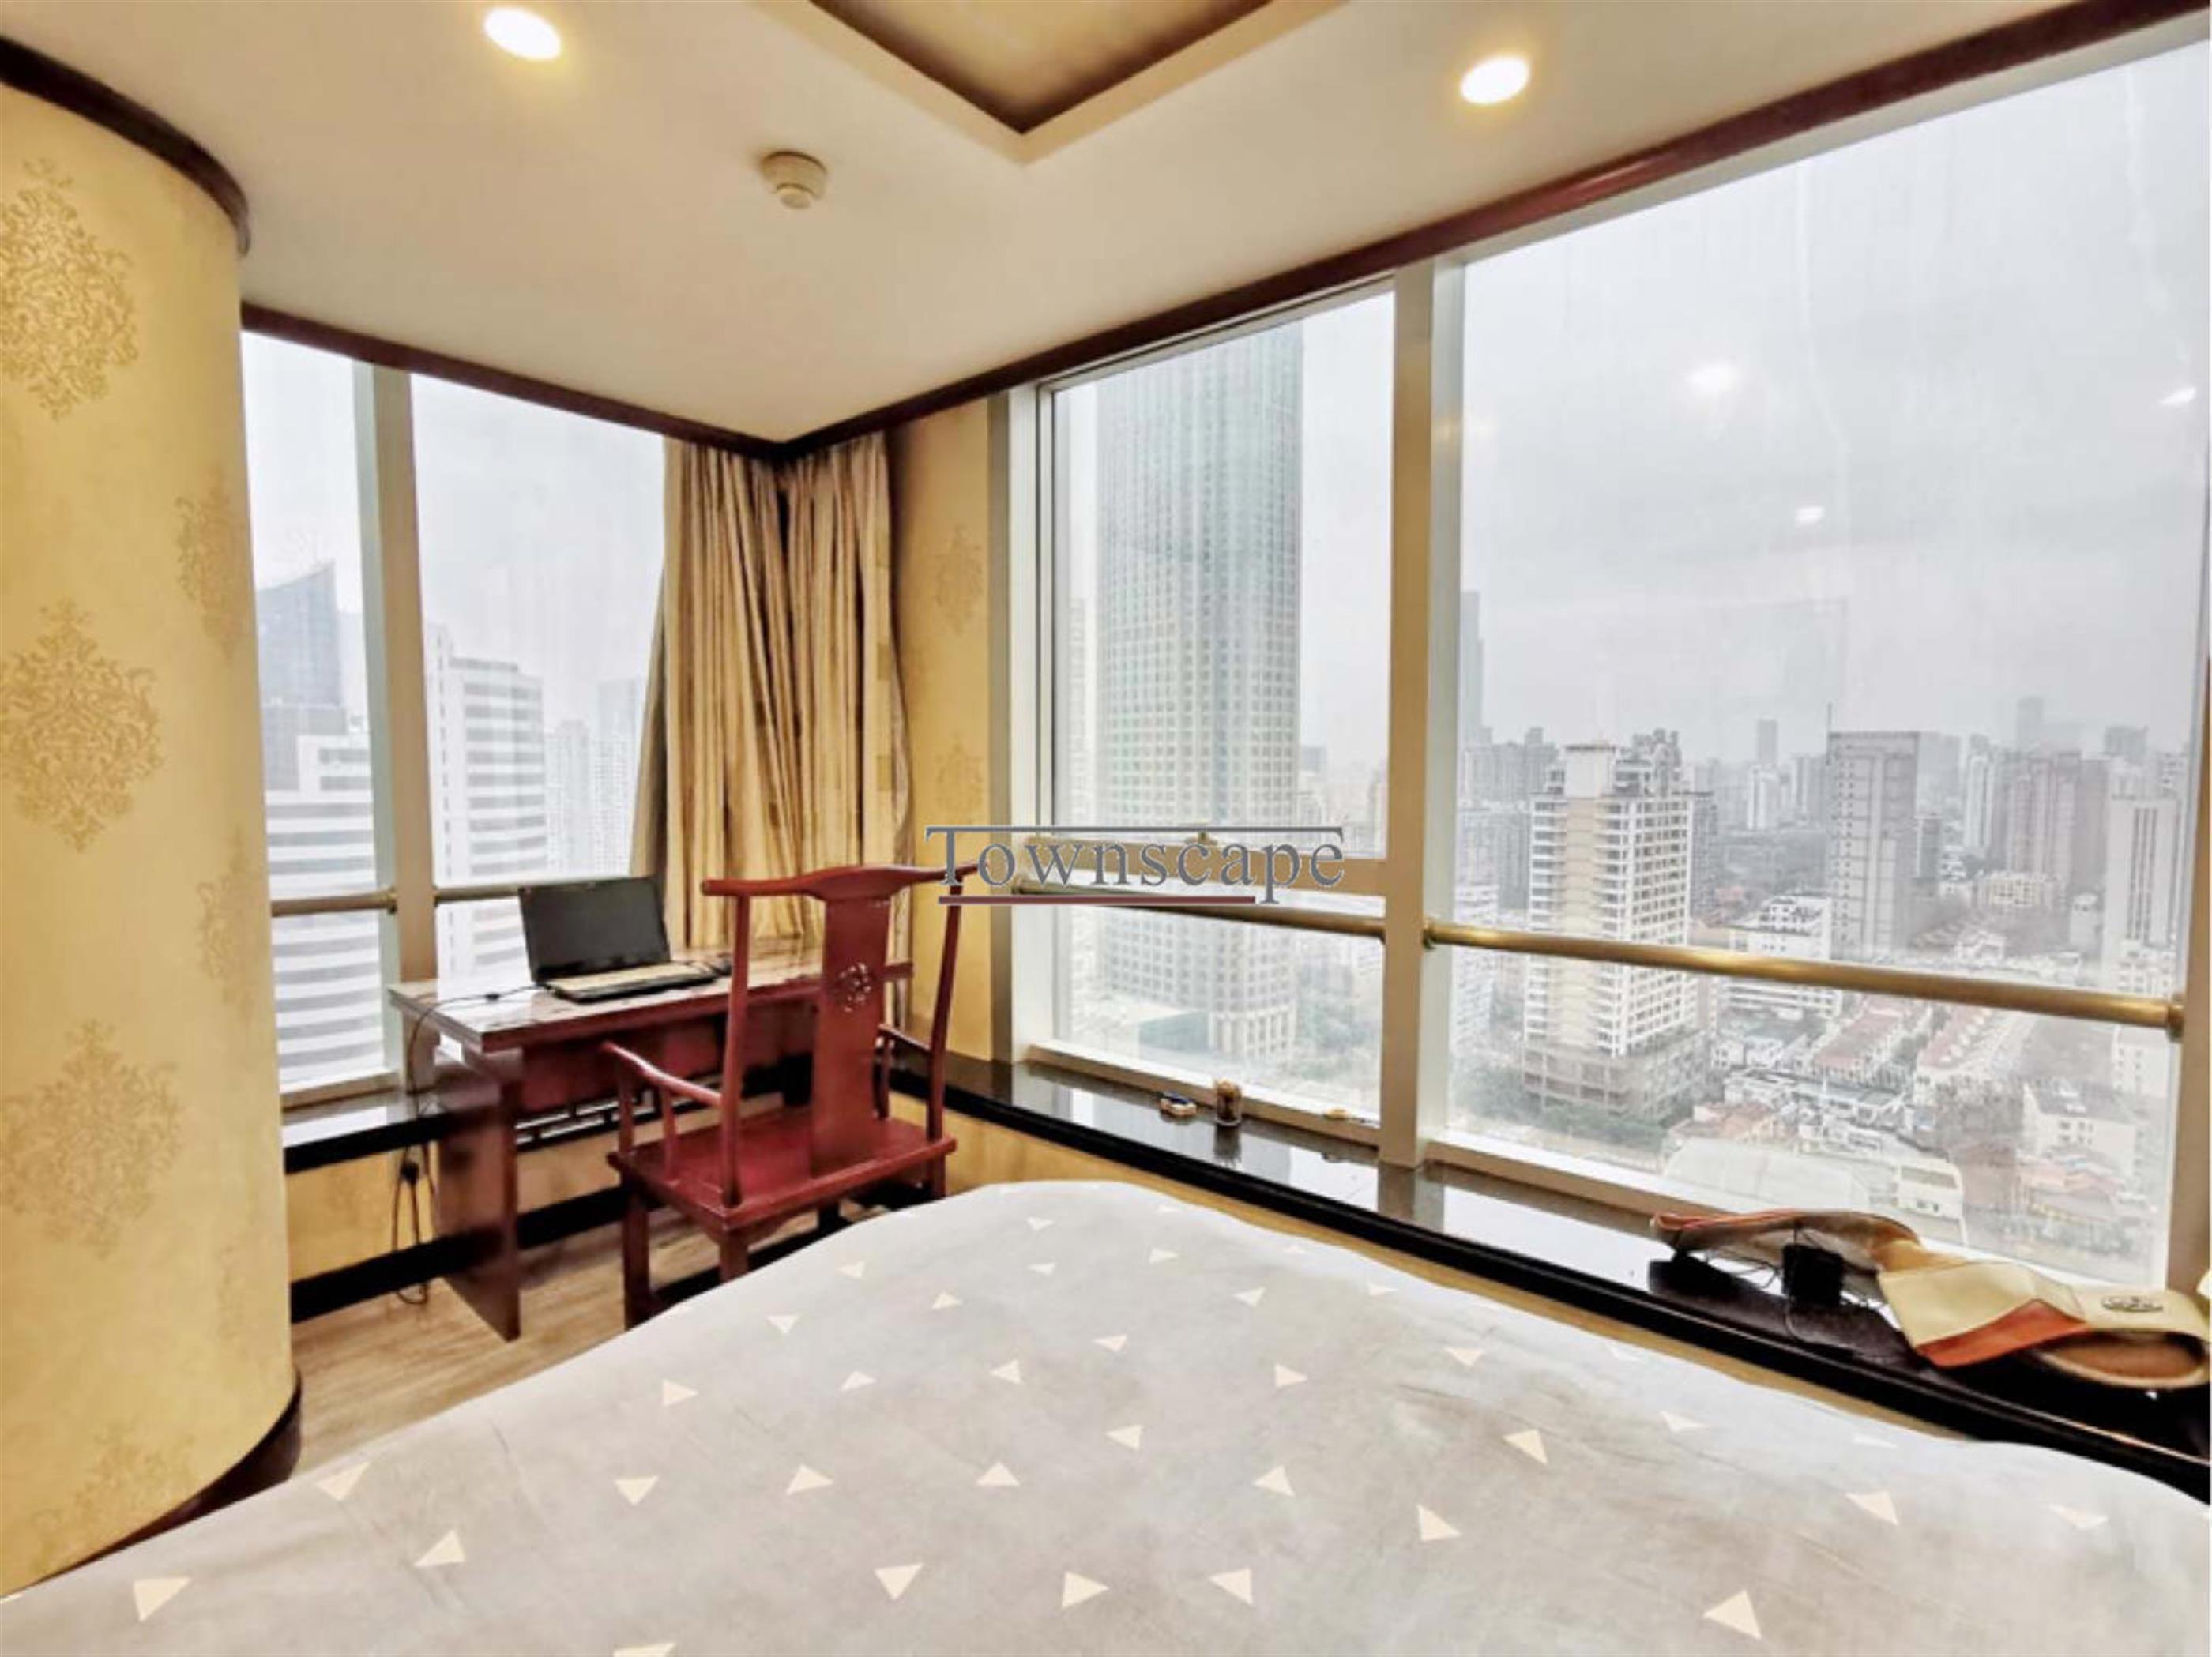 panoramic views Comfortable Cozy West Nanjing Road 1BR Apartment nr LN 2/12/13 for Rent in Shanghai